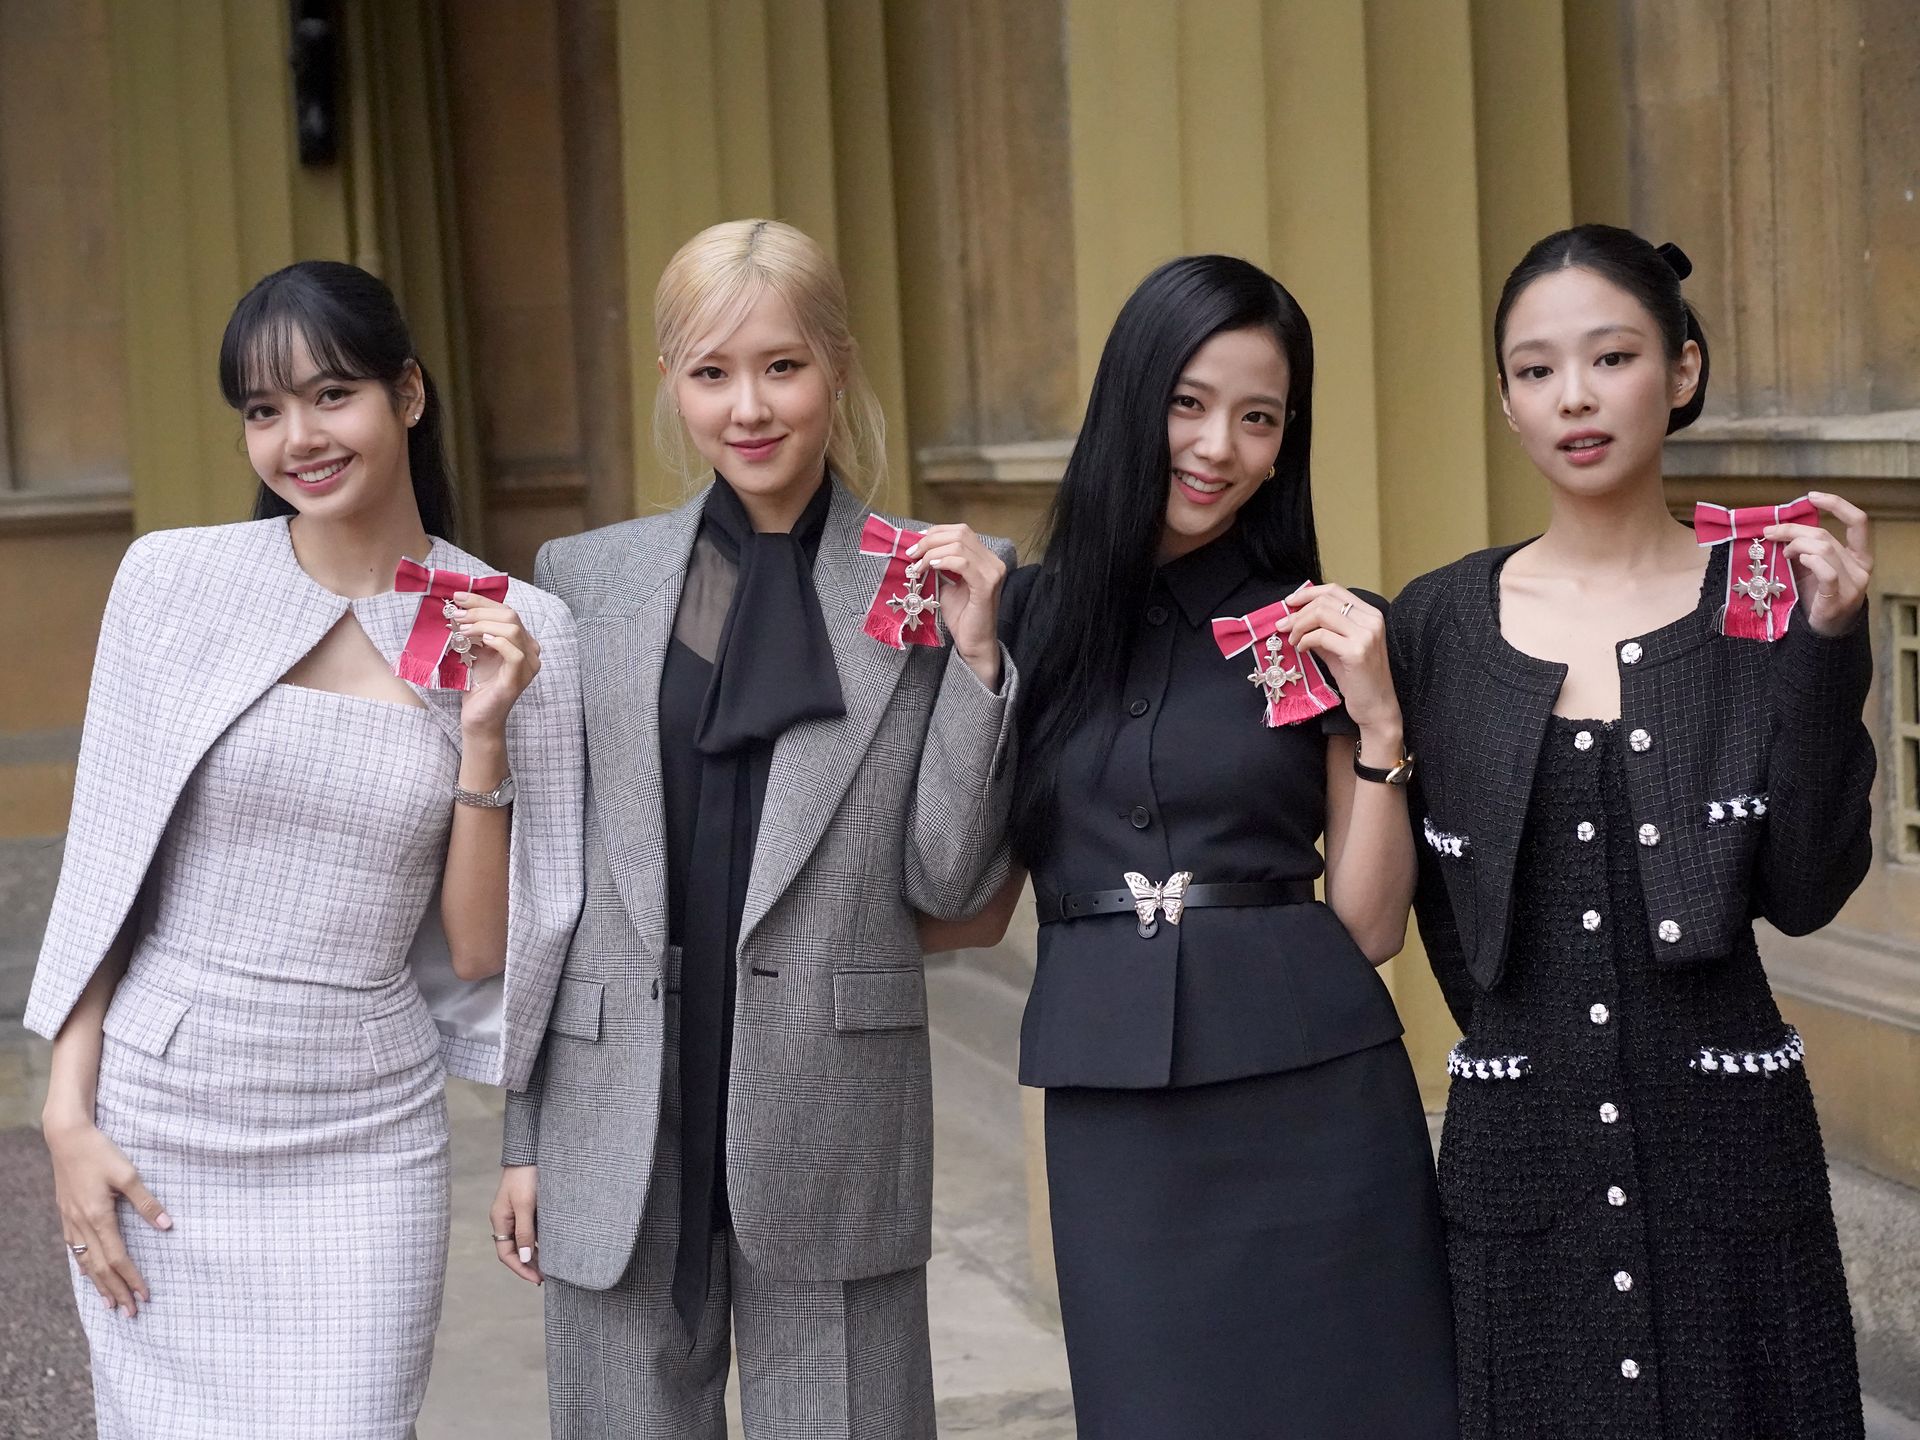 Blackpink accept their Honorary MBE from King Charles III in style